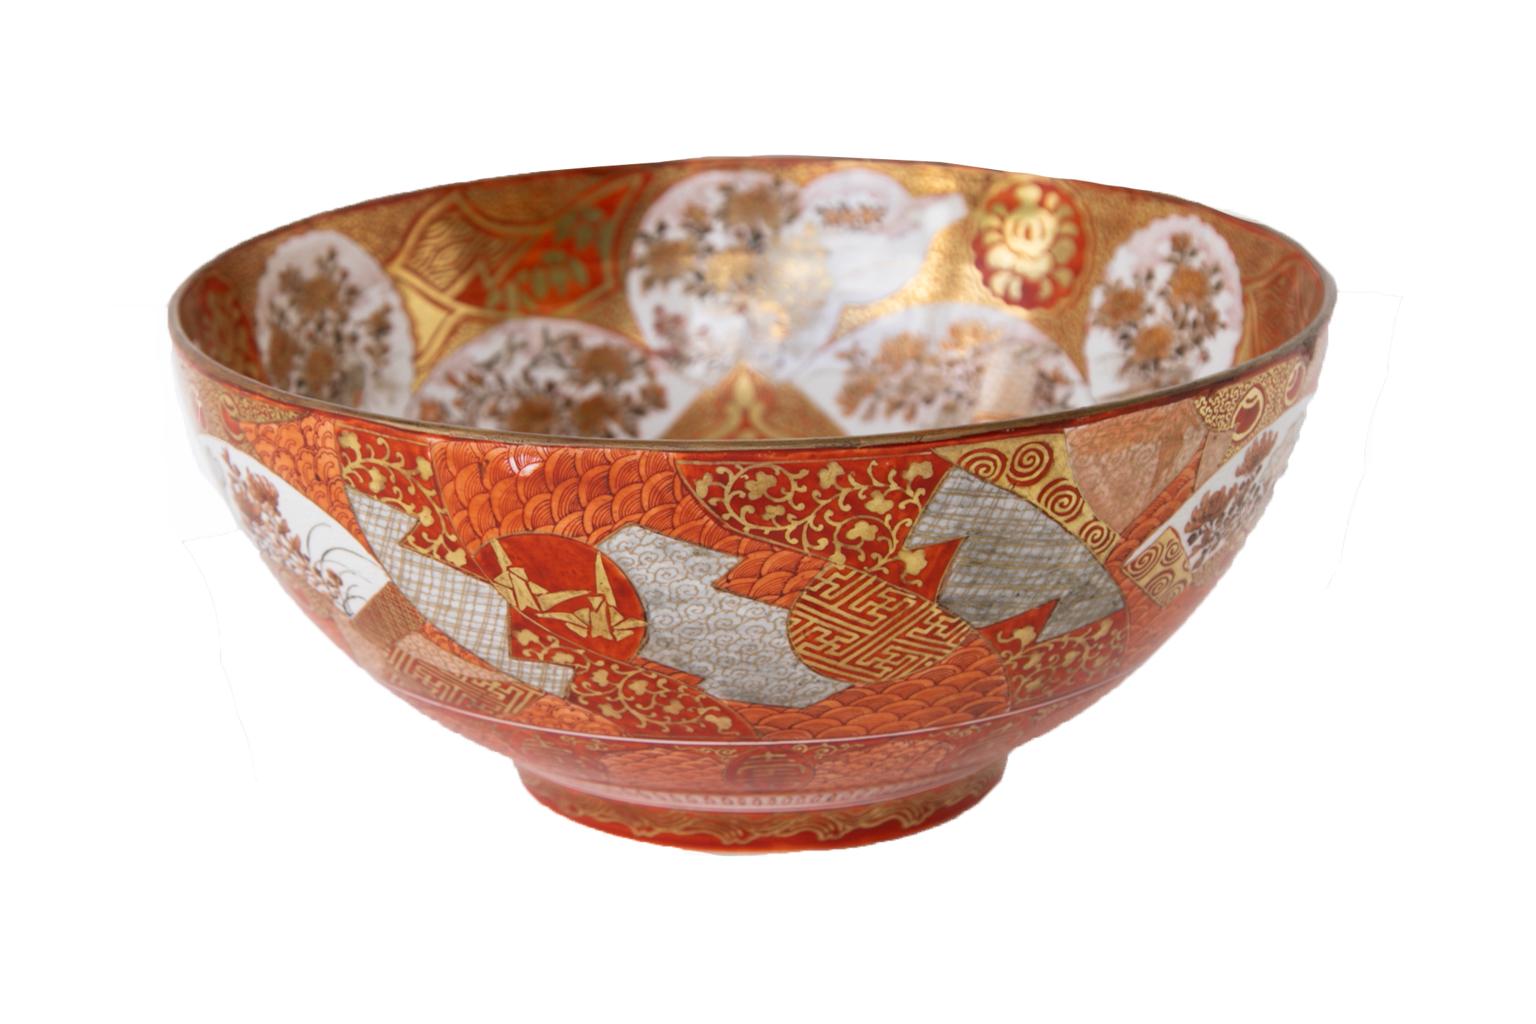 Japanese Kutani bowl, with the interior having multiple vignettes depicting a fan, gourd, vase, and plate patterns with birds and flowers done in very fine detail. The center panel shows three court ladies with children surrounded by gilt brocade